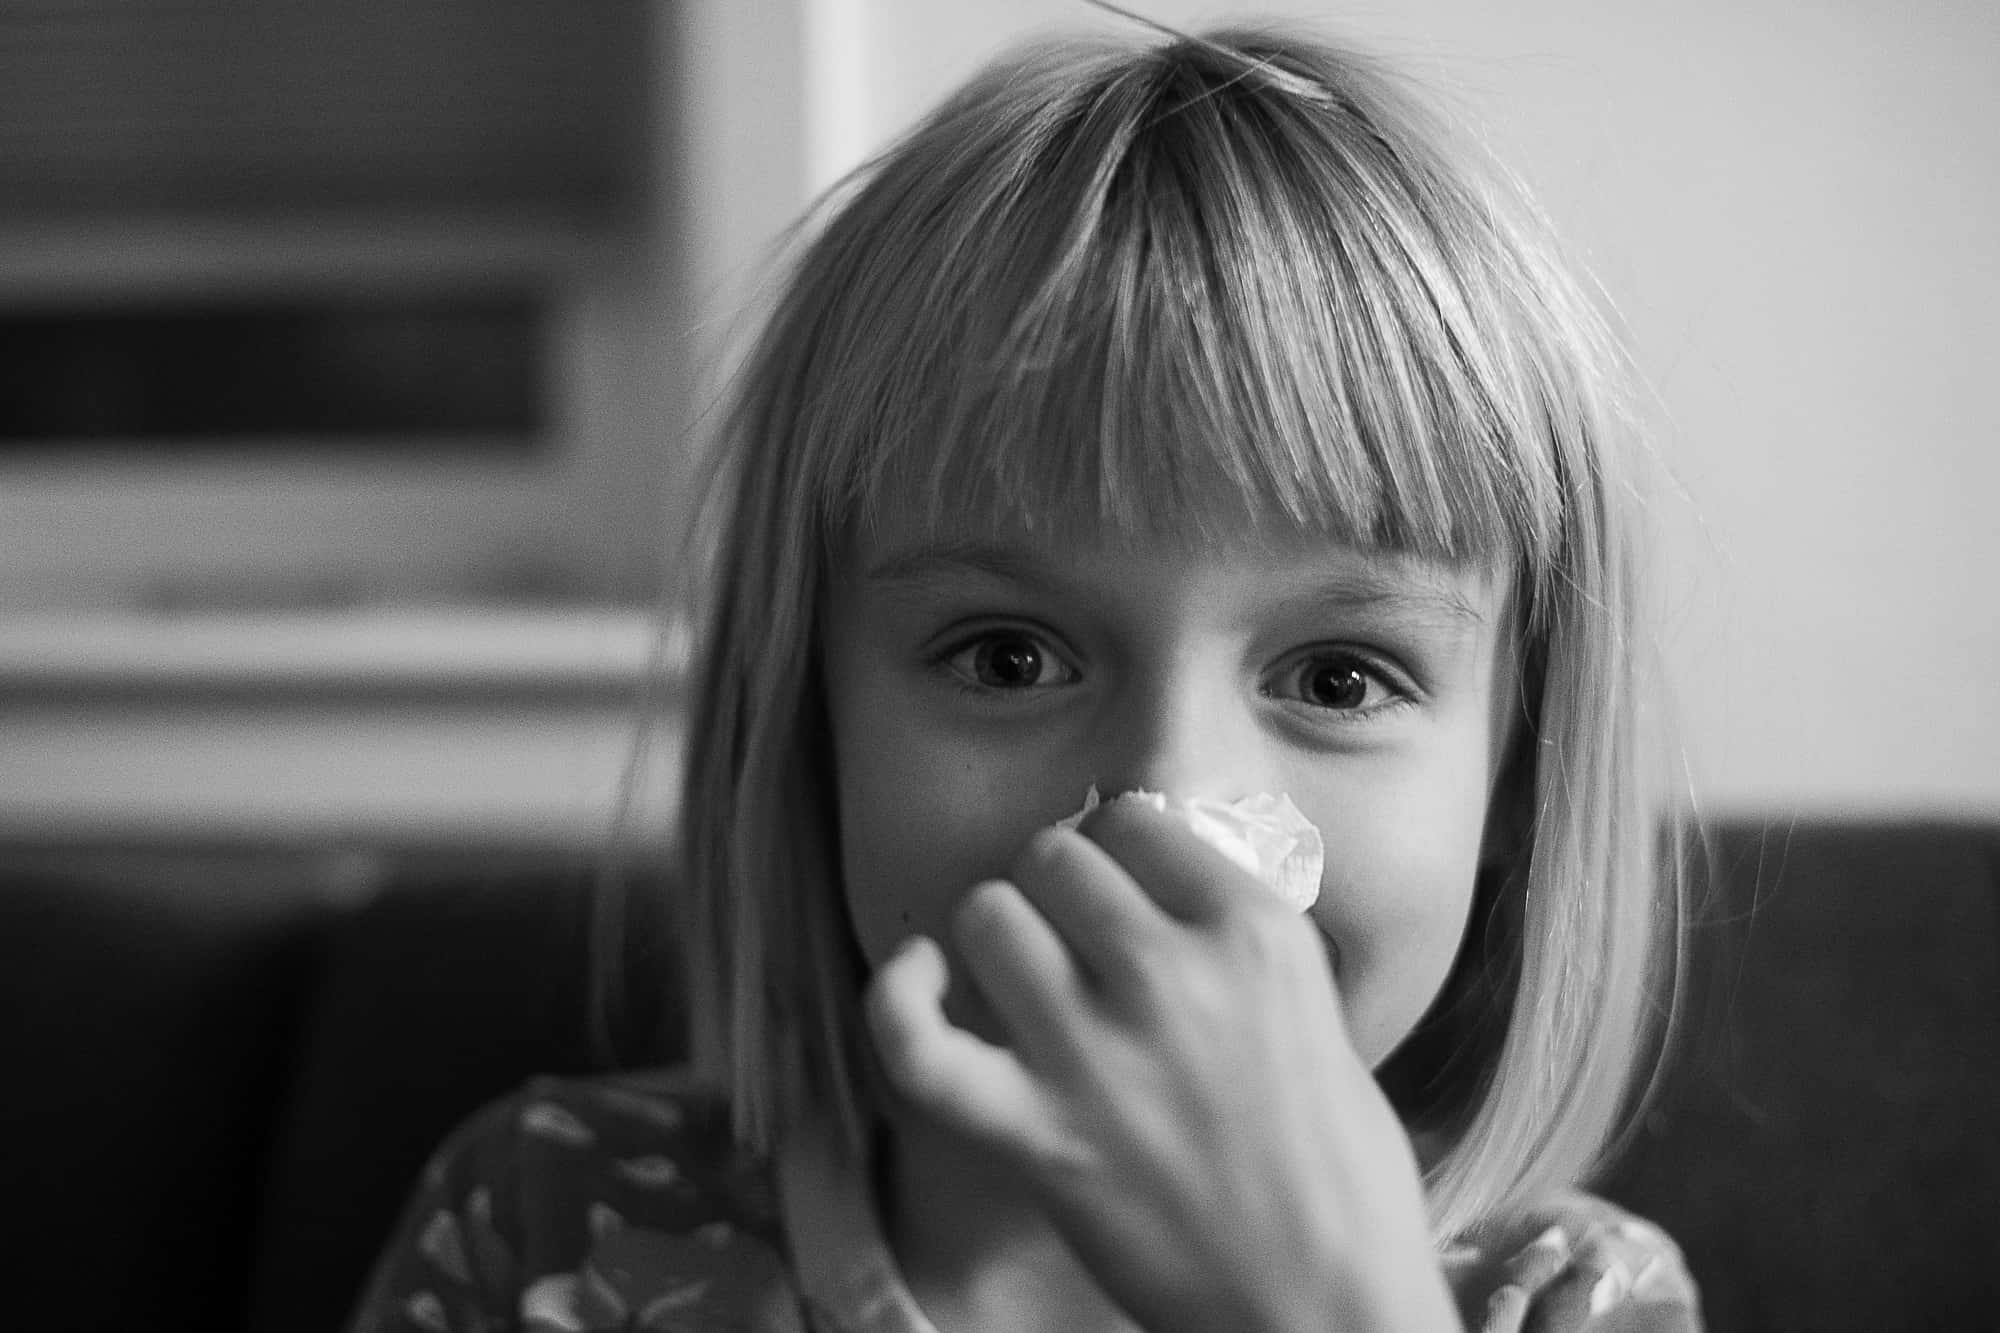 How to stop a nose bleed safely and effectively (first aid tips for kids)